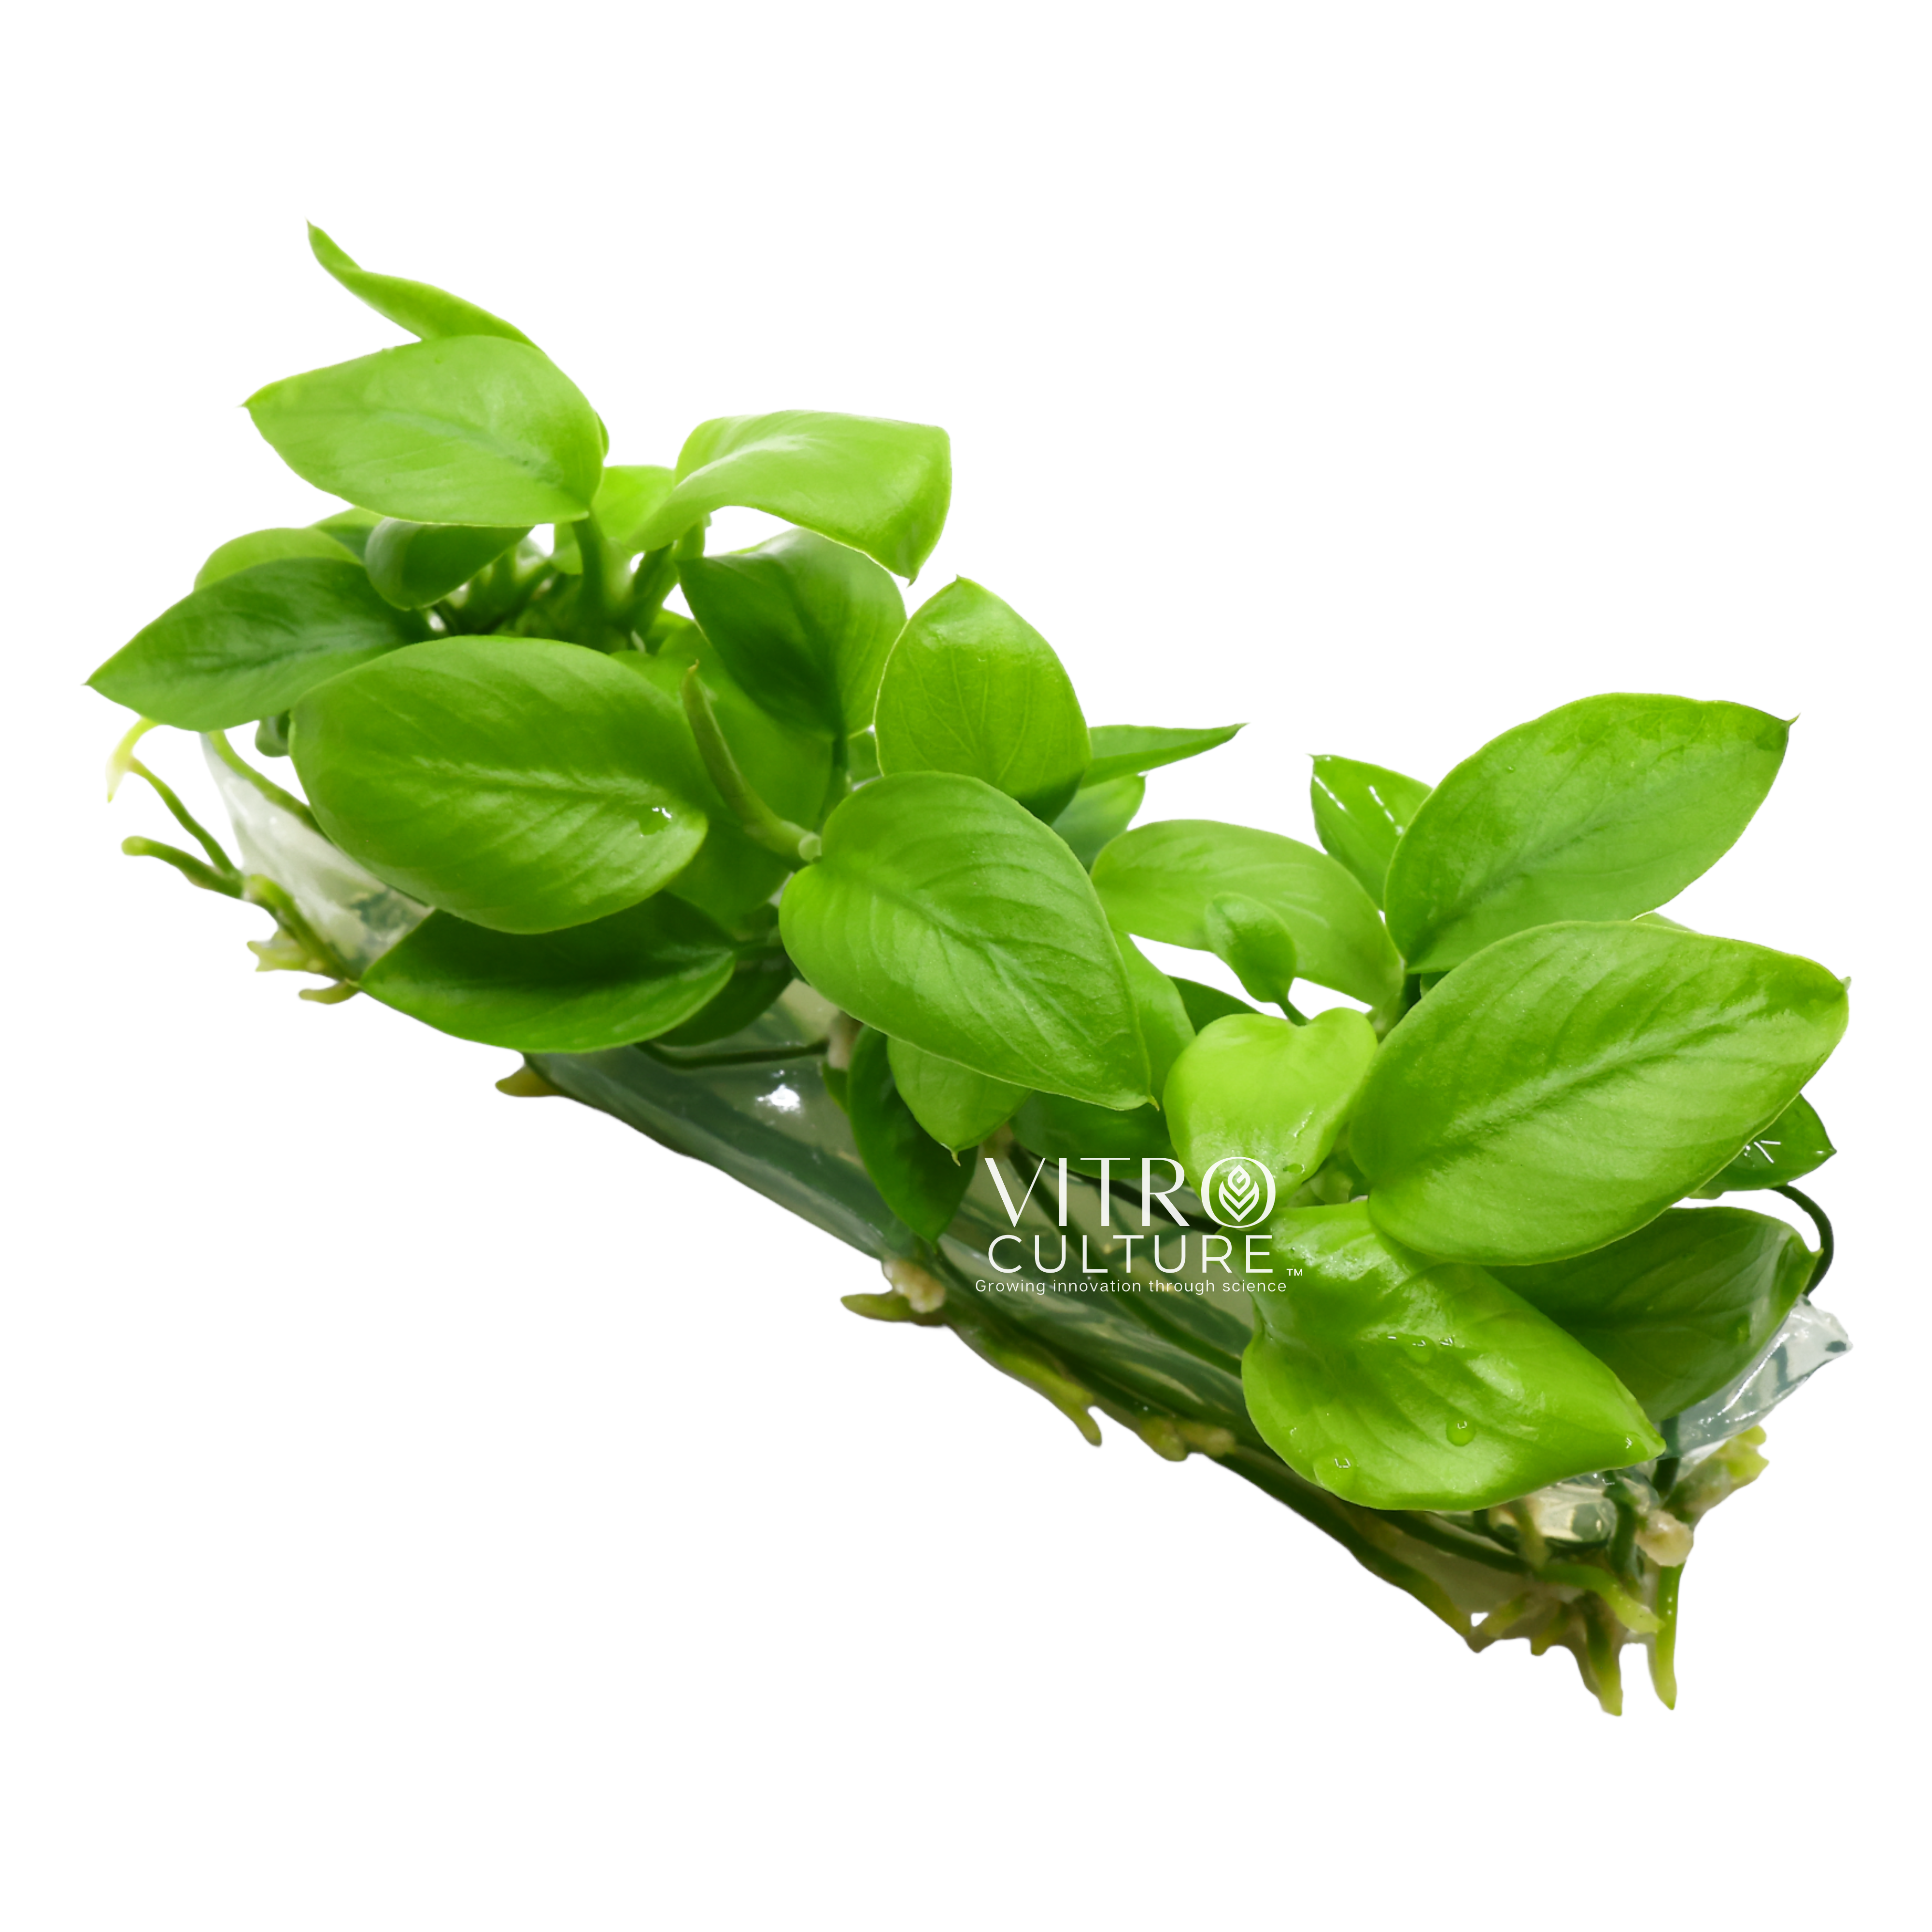 Anubias golden is a low-maintenance variety that is perfect for beginners or experienced aquarists who want to add some variety to their aquariums. It can be attached to driftwood or rocks and can be easily propagated by division.